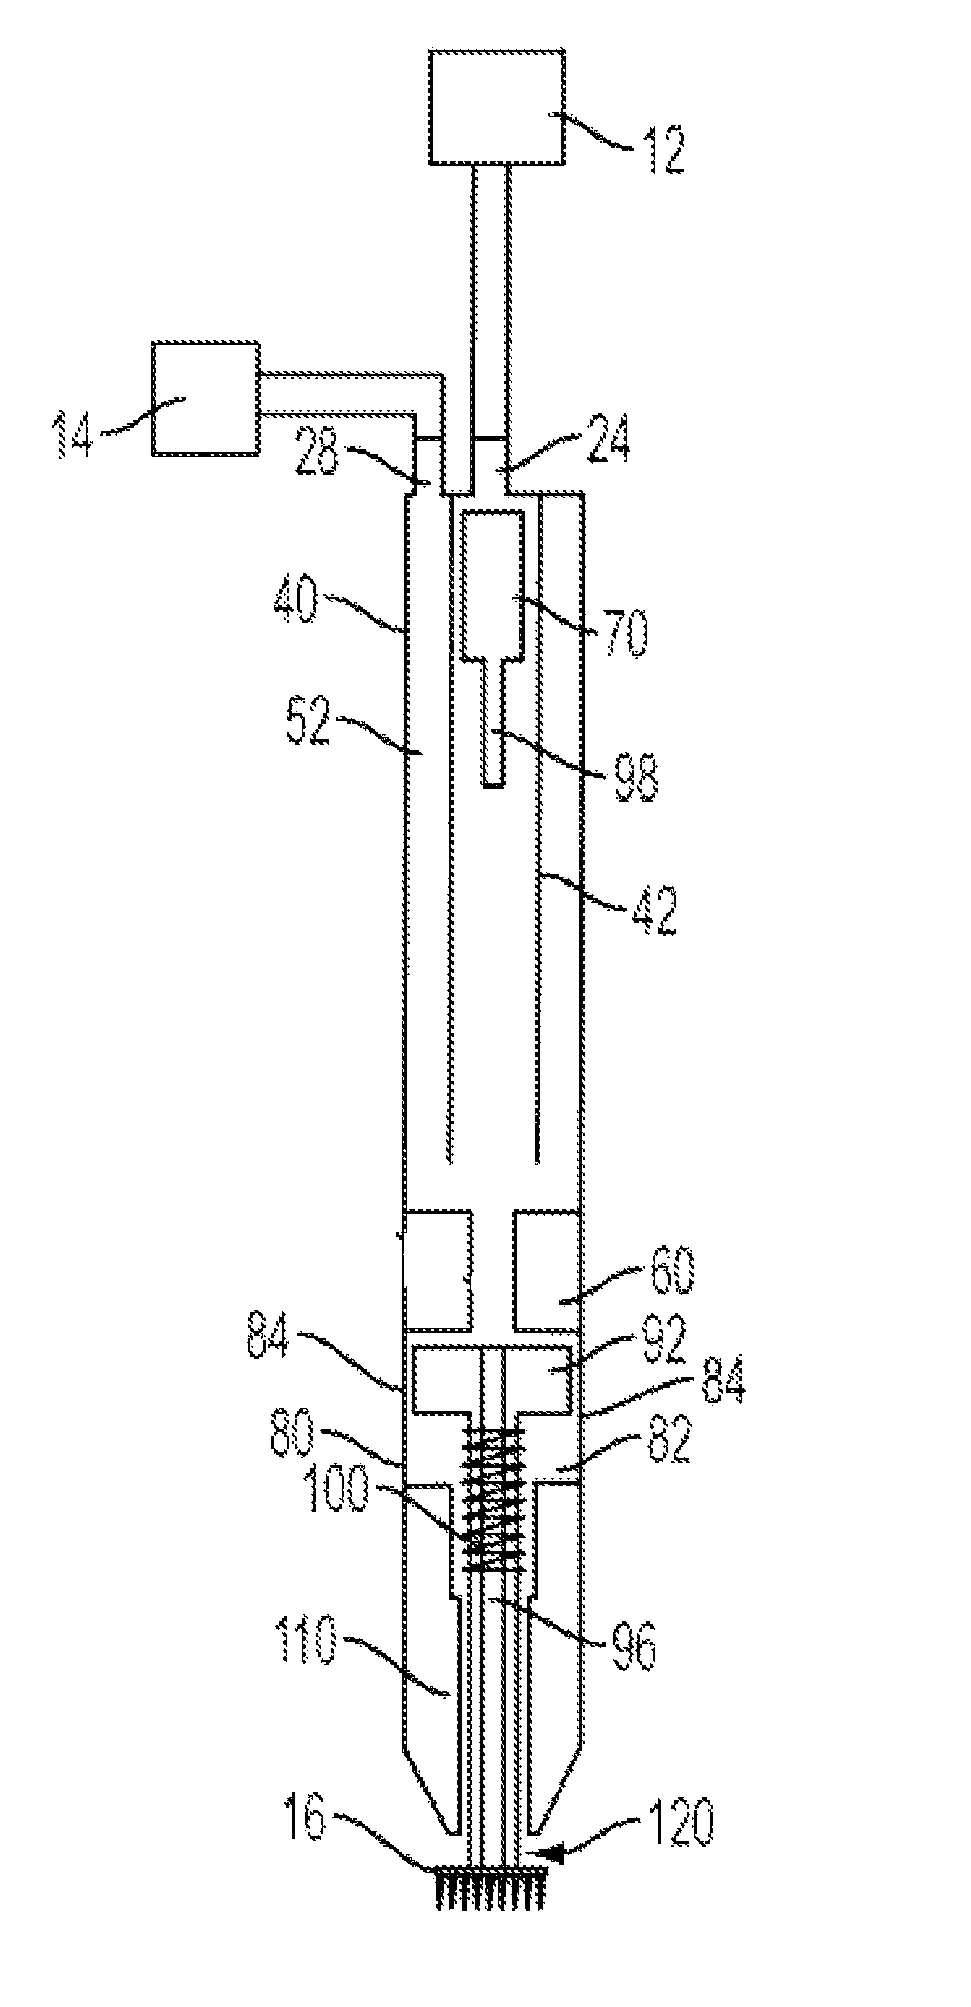 Device and method for manipulating and inserting electrode arrays into neural tissues